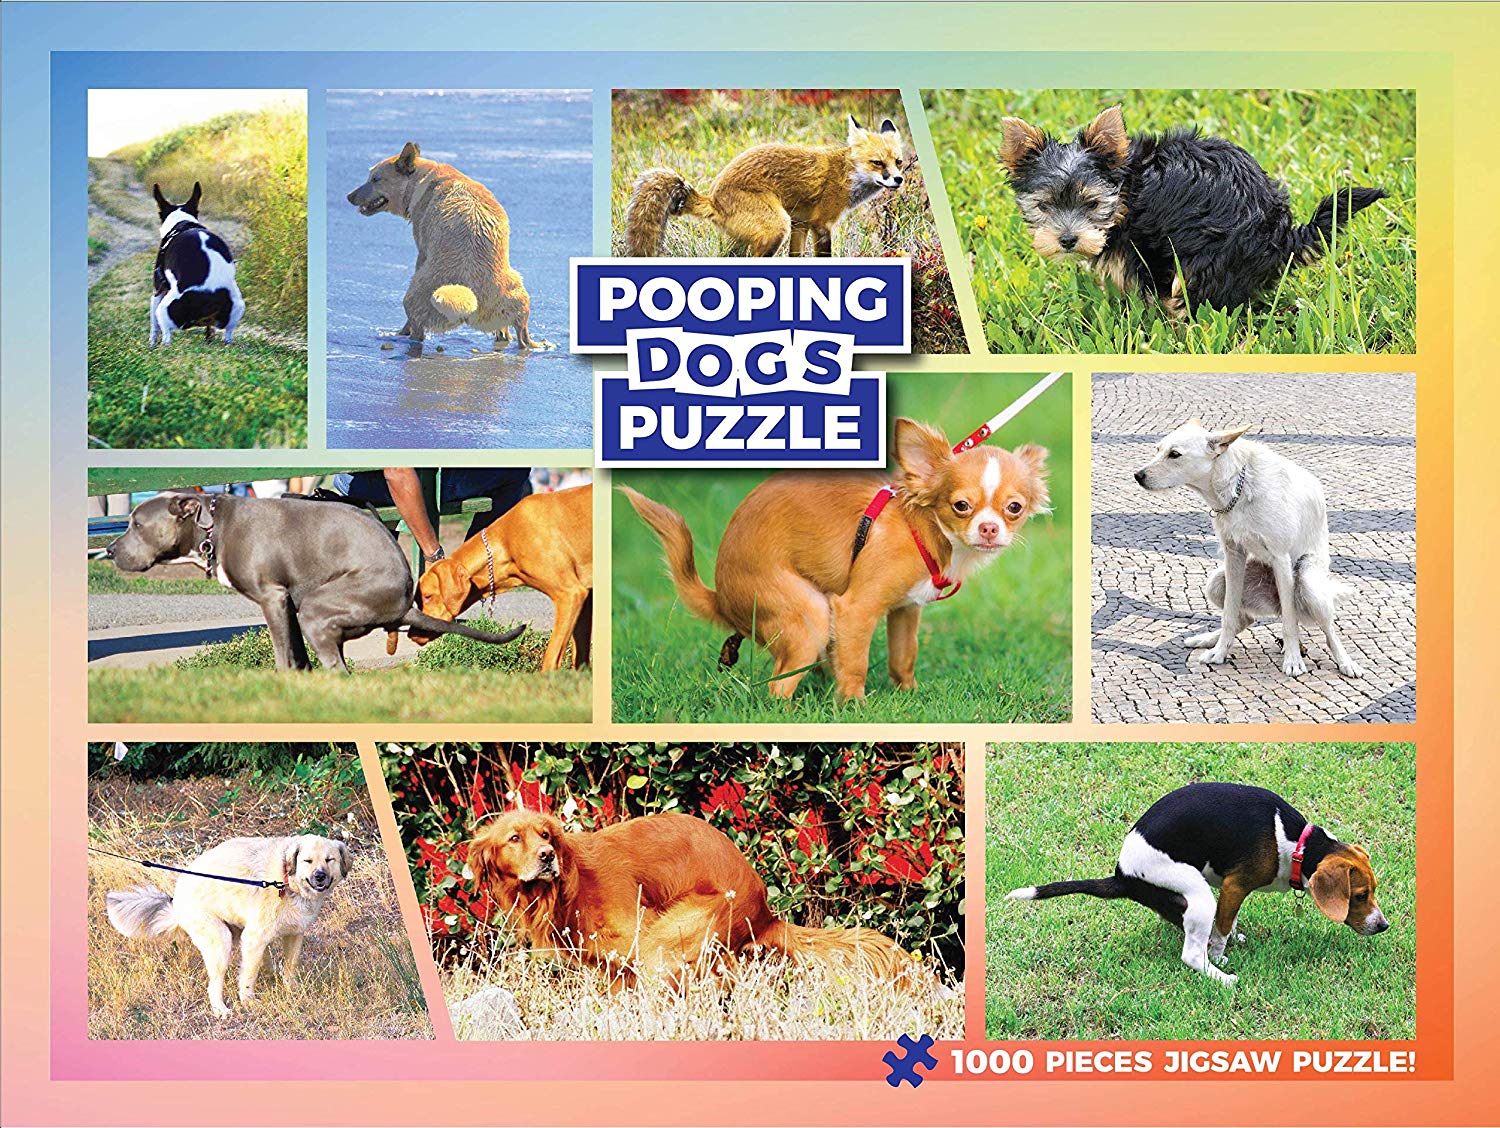 Pooping Dogs Jigsaw Puzzle - Funny Gag Gift for Dog Lovers and Owners - 1000 Piece Puzzle